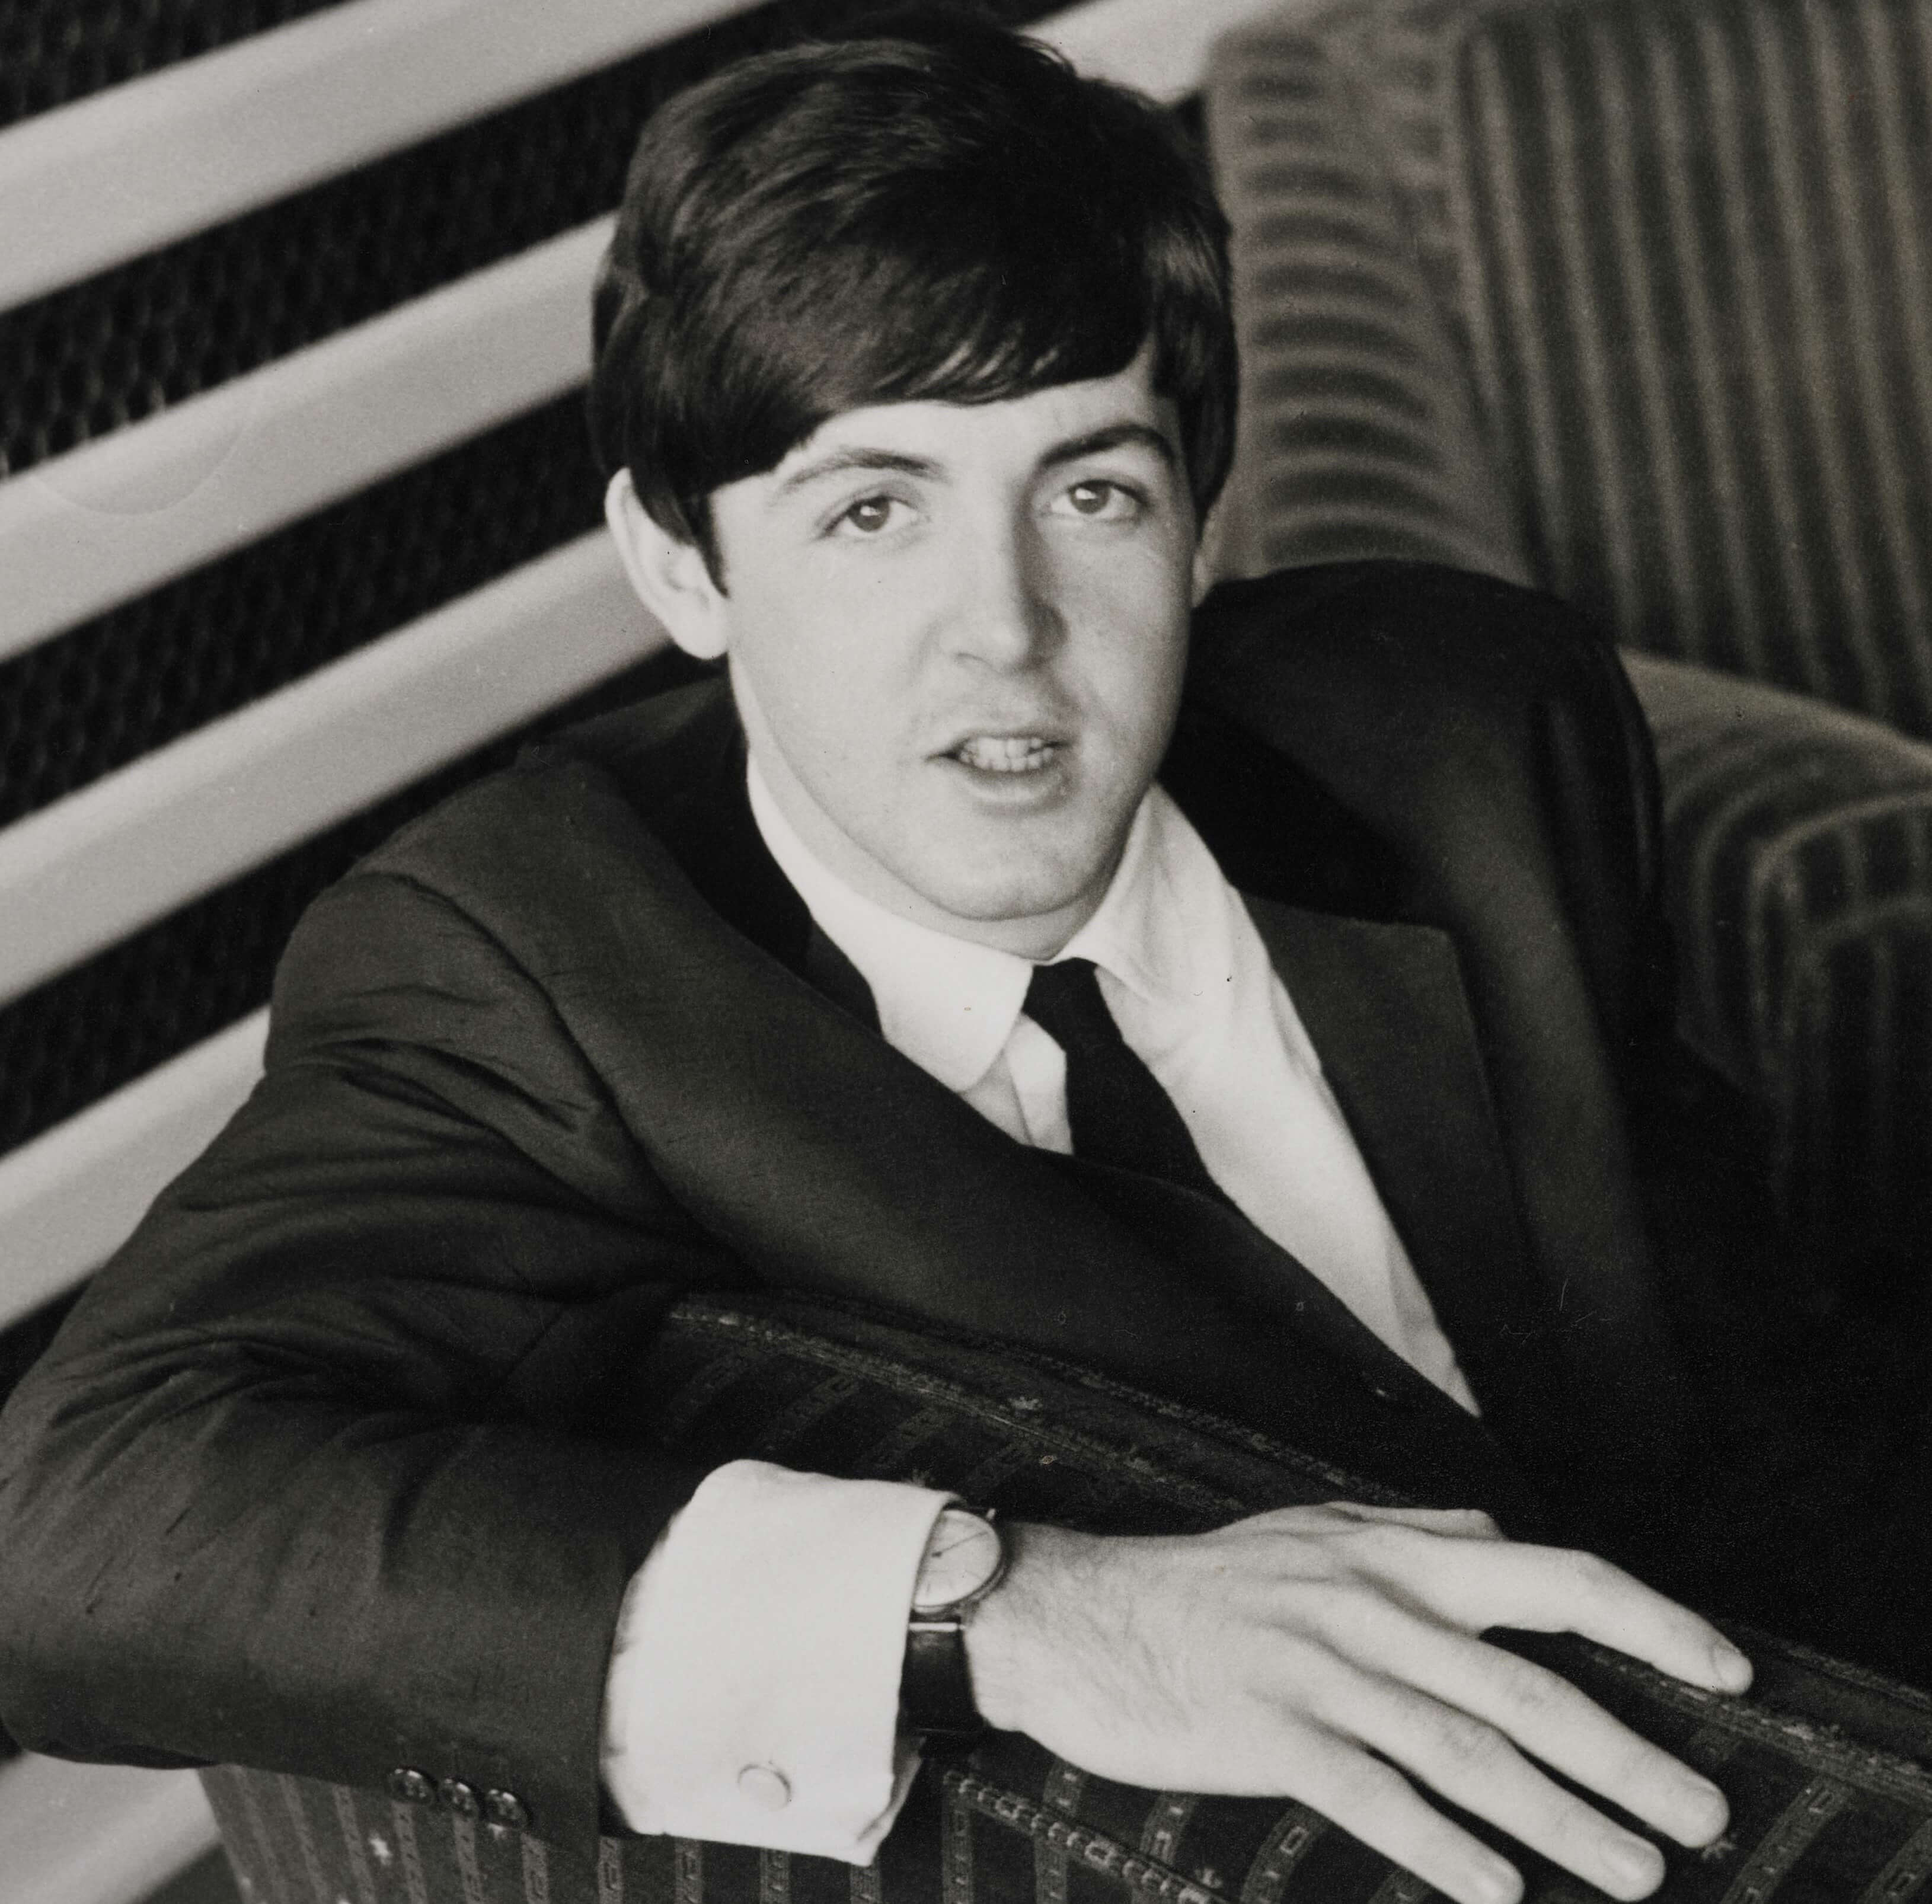 Paul McCartney in a suit during The Beatles' "Hey Jude" era